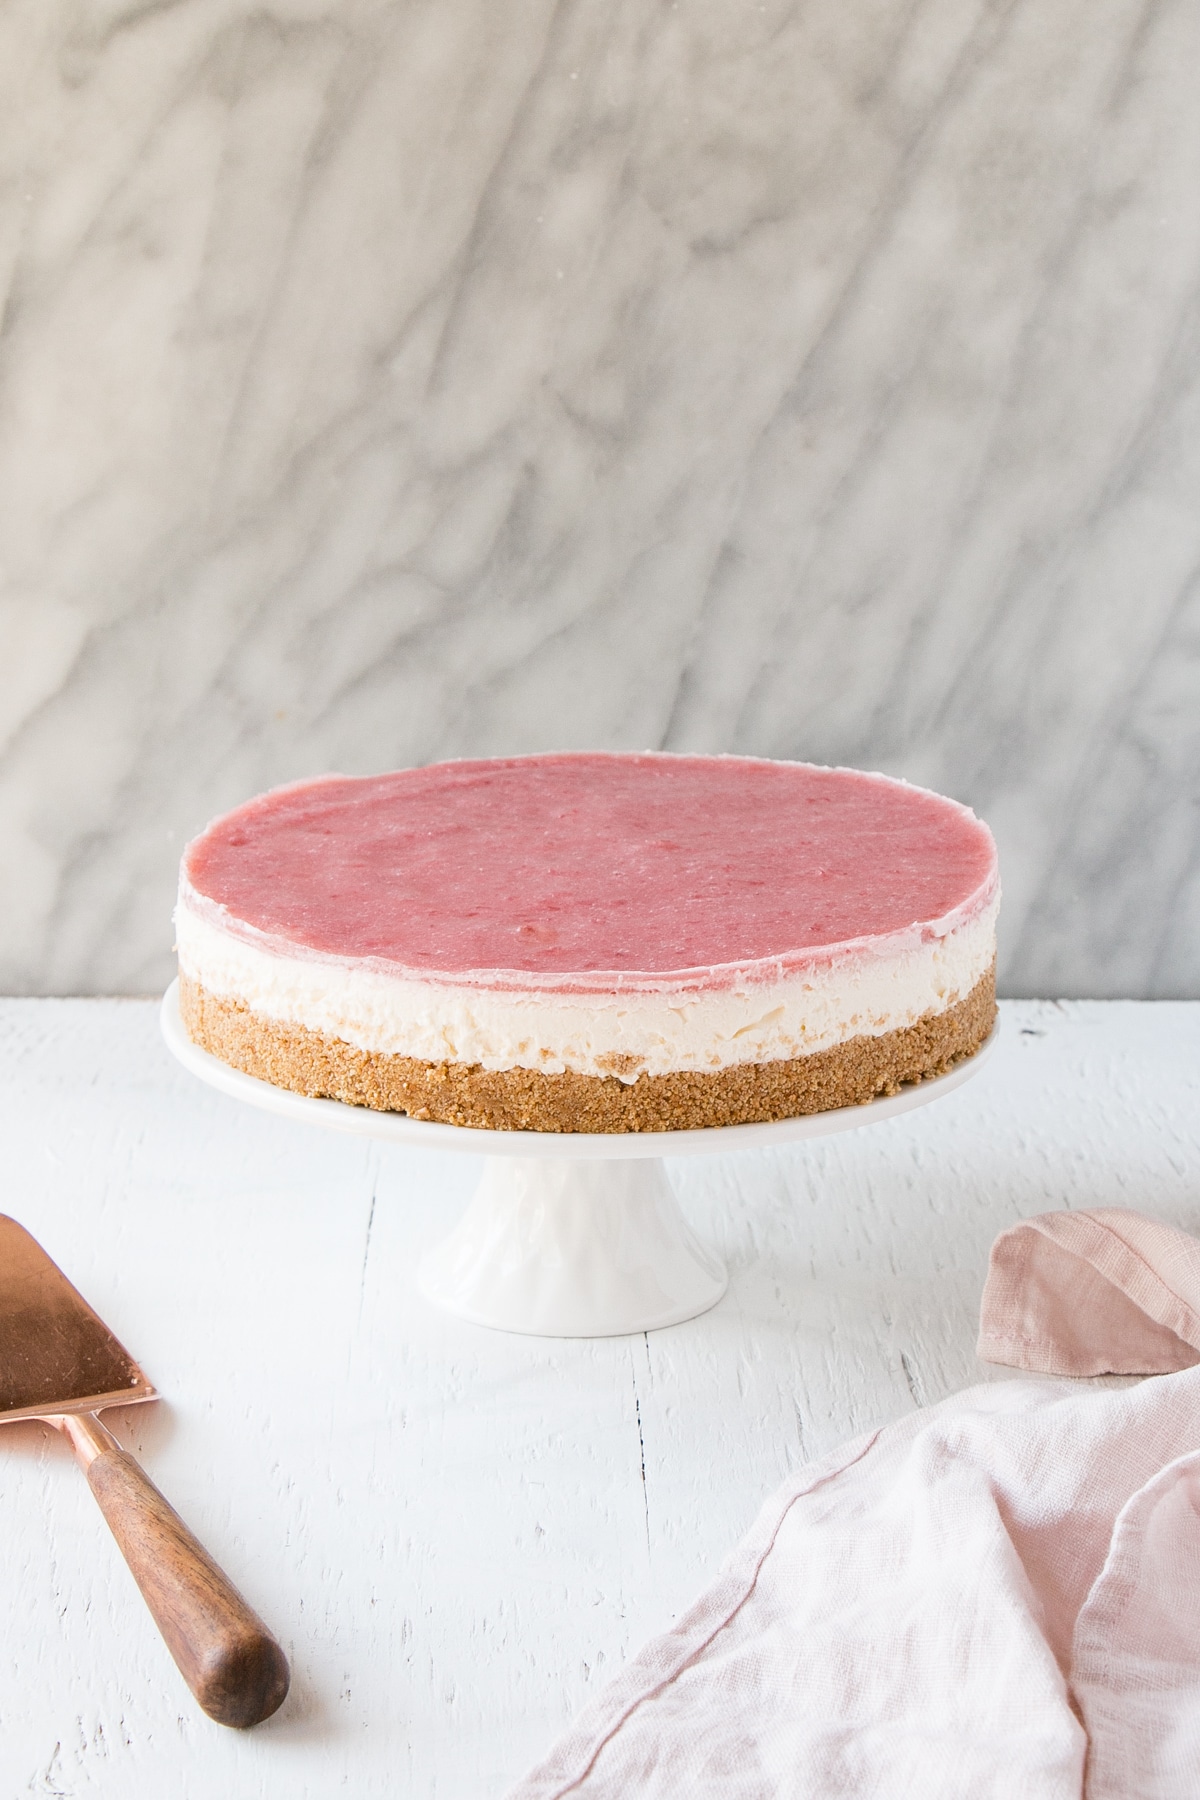 Side view a of No Bake Rhubarb Cheesecake on a white cake stand with a pink tea towel and a serving knife.